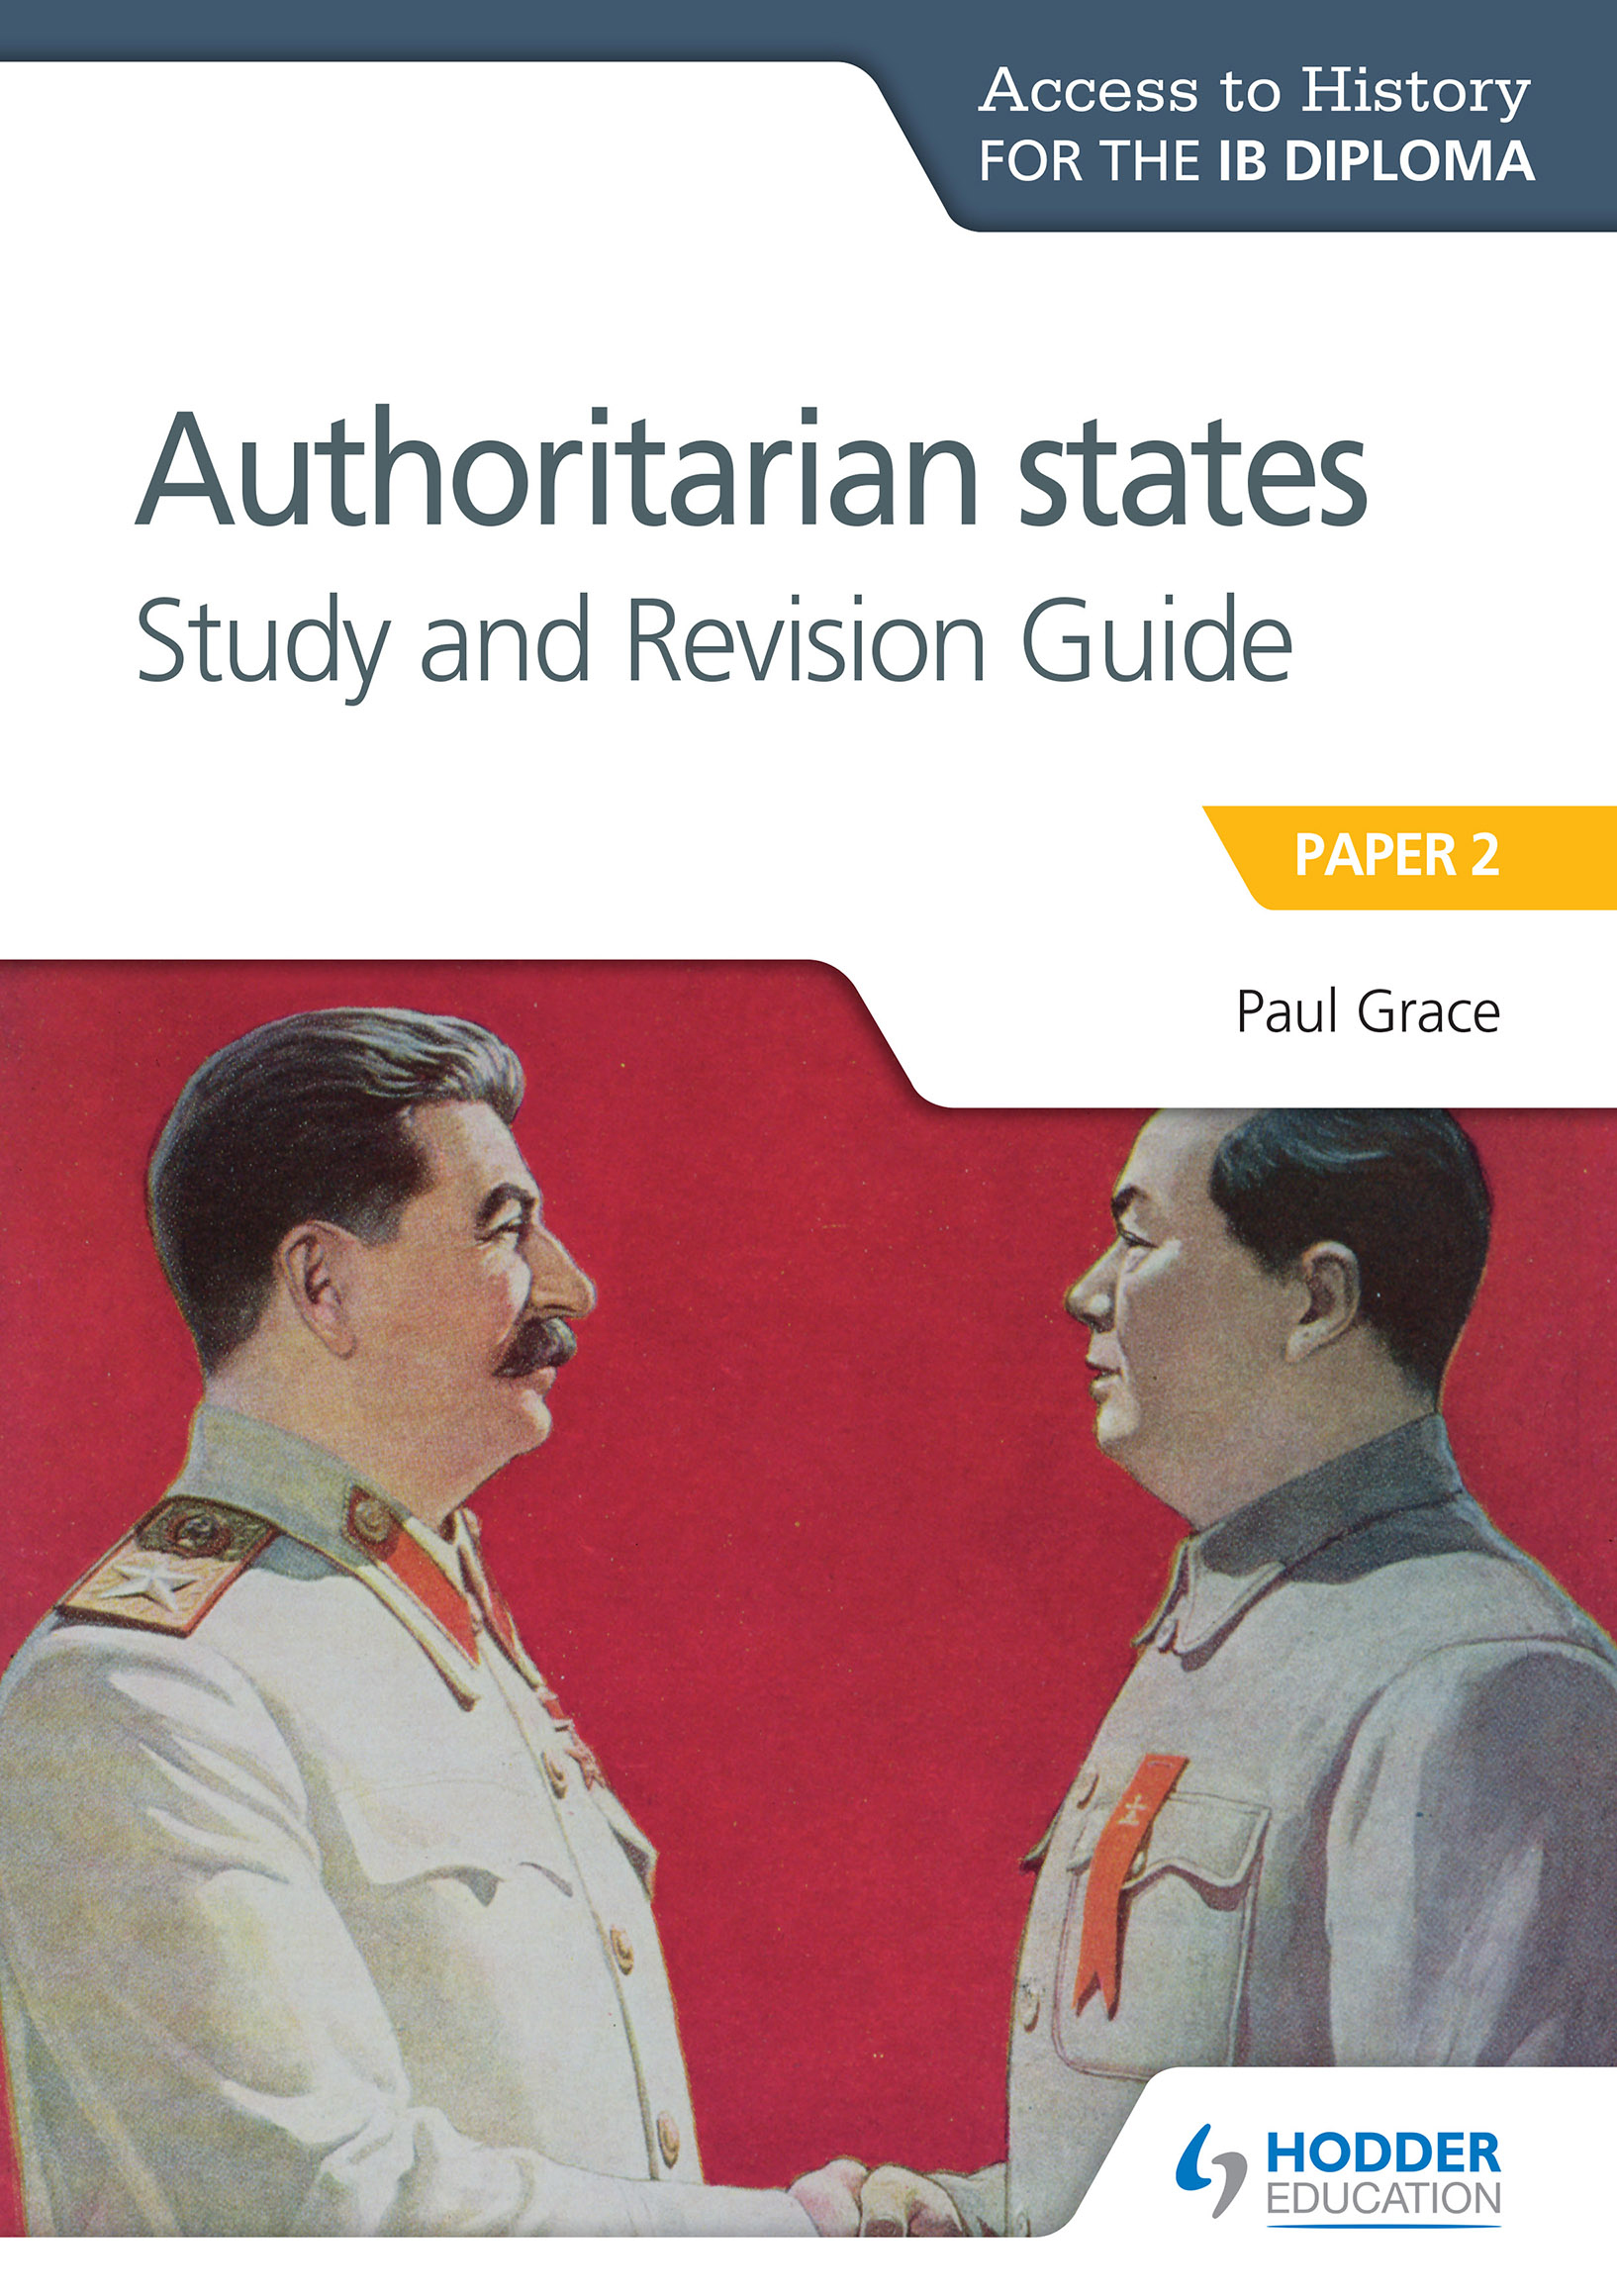 Access to History for the IB Diploma: Authoritarian States Study and Revision Guide